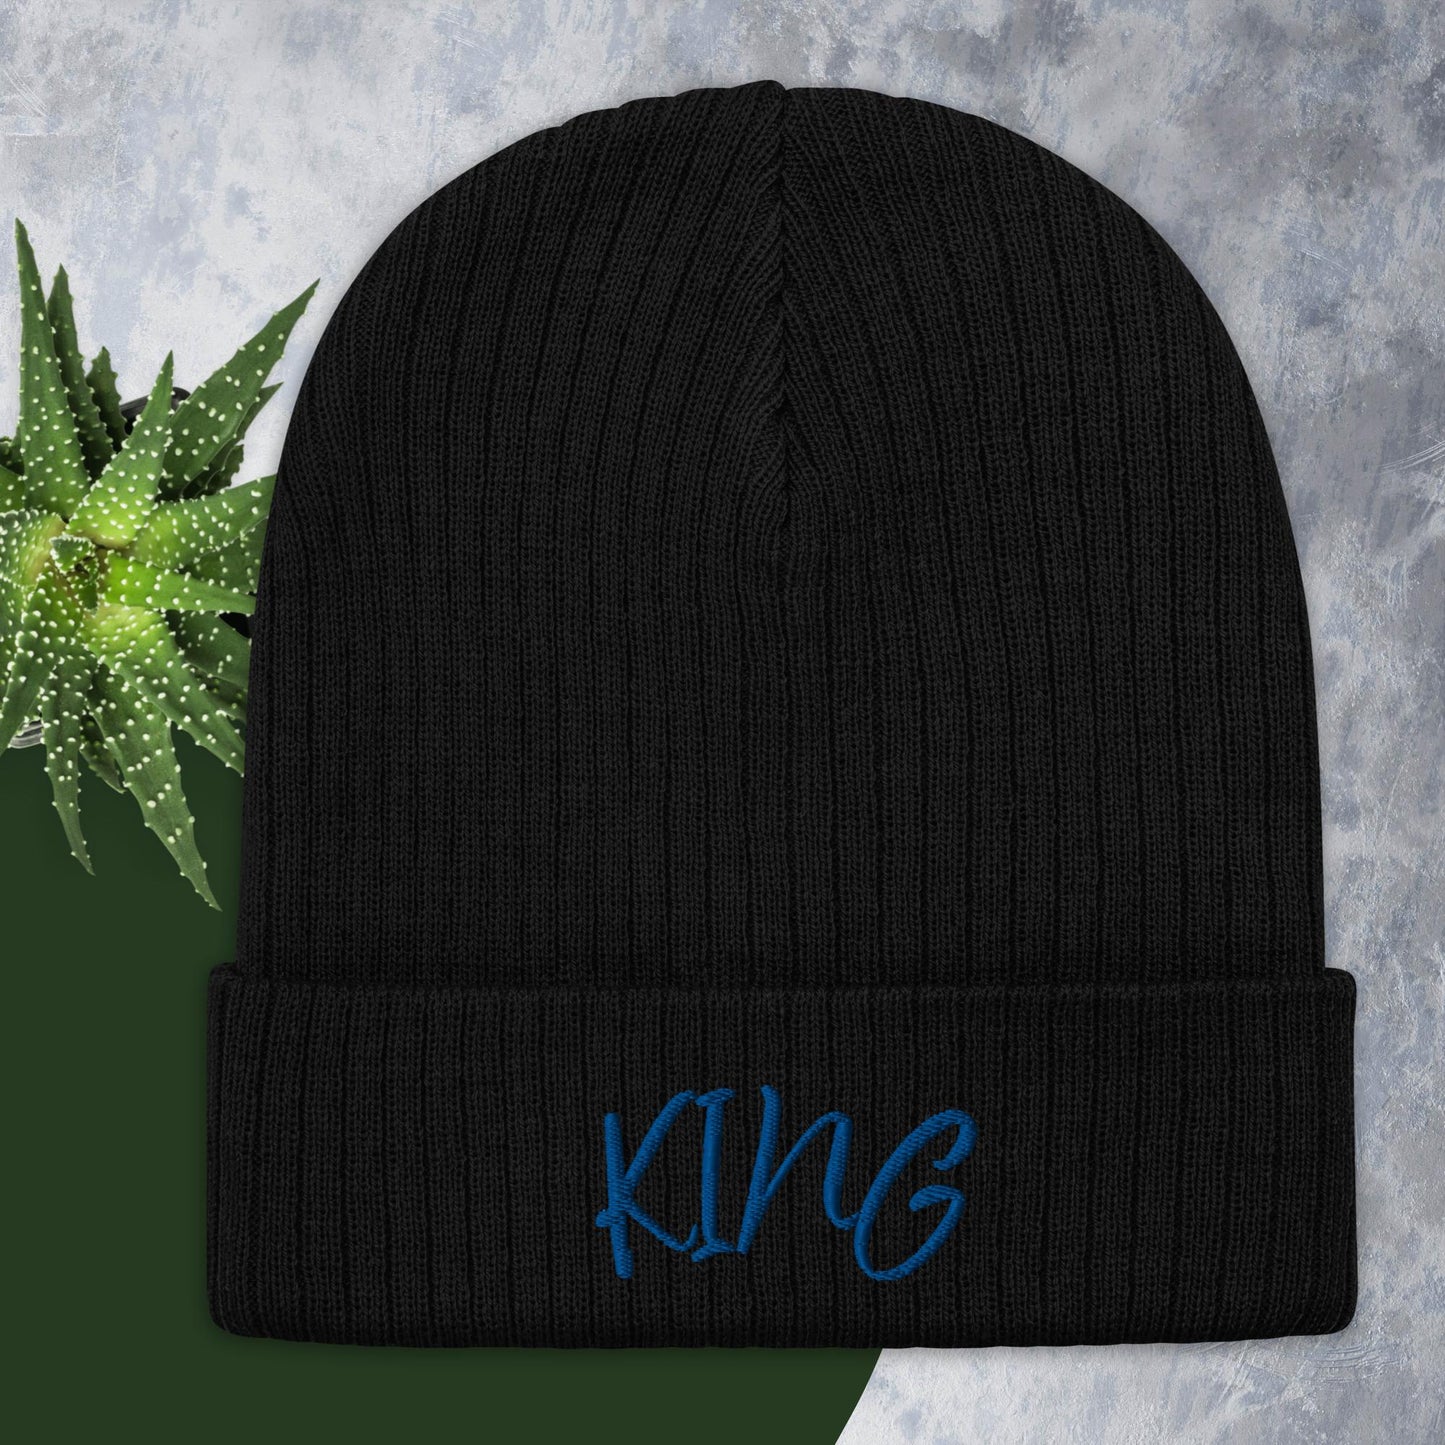 "King" Ribbed knit beanie